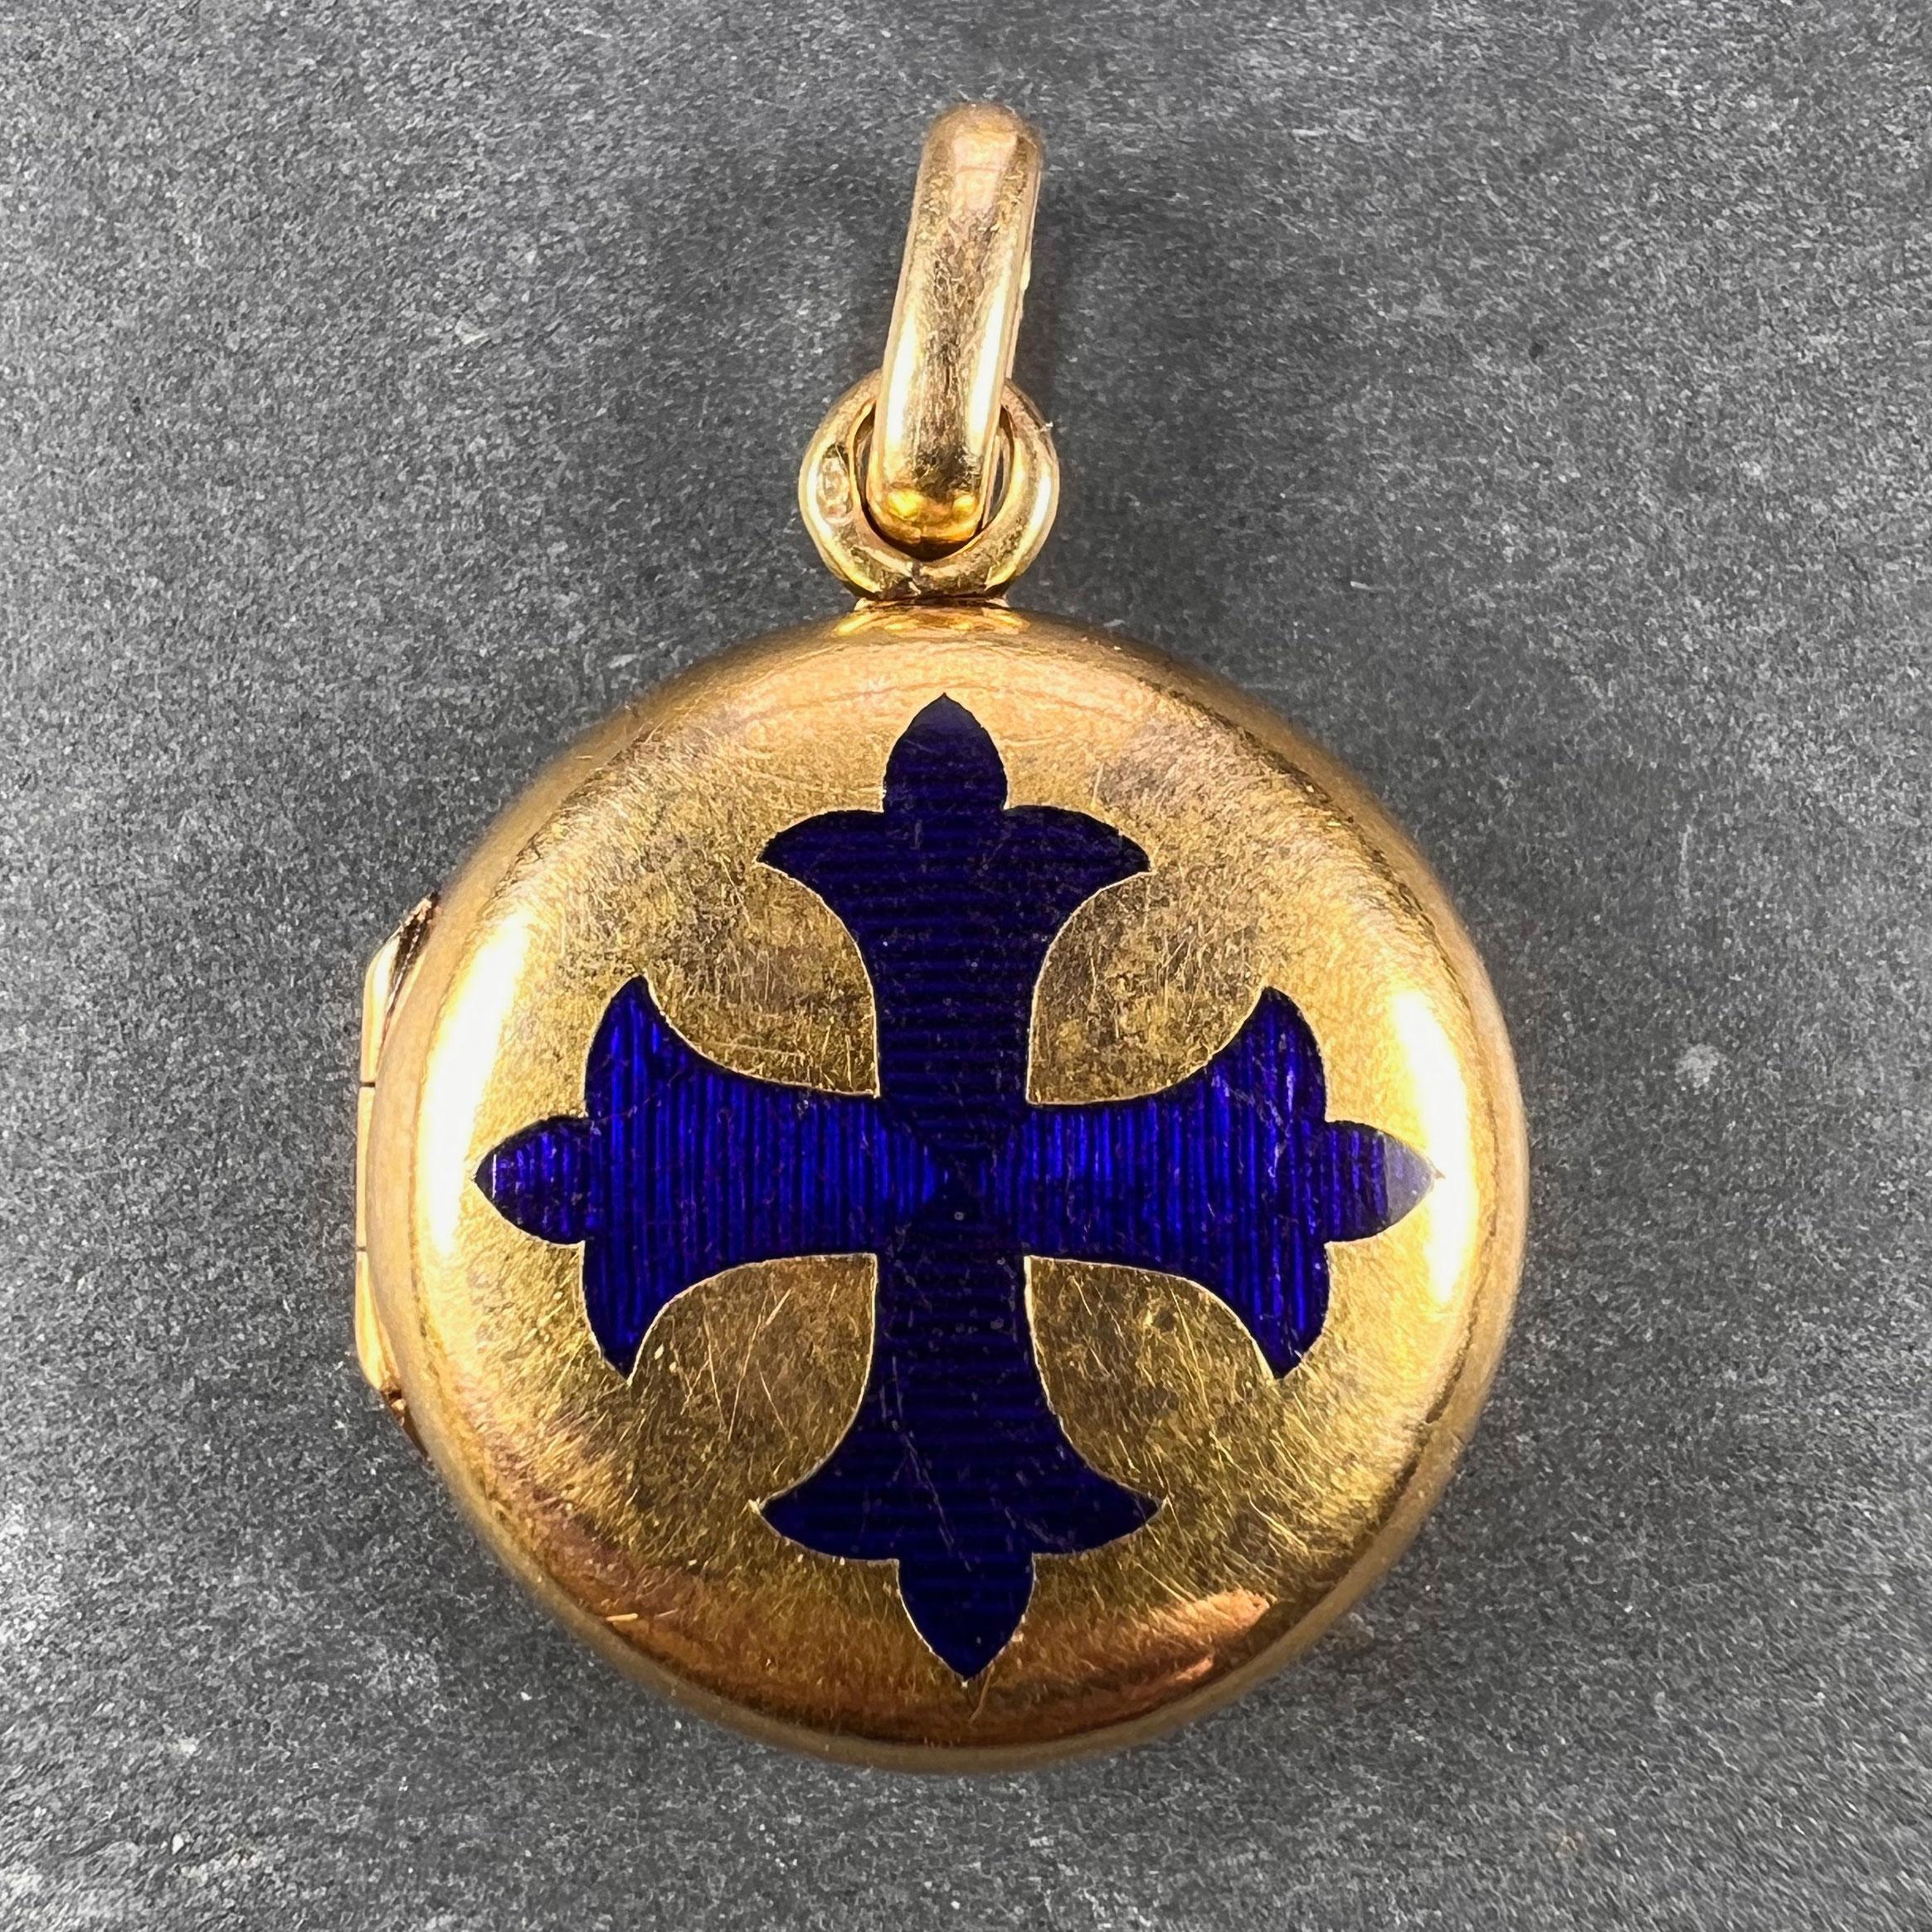 An 18 karat (18K) yellow gold locket pendant designed as a reliquary for the True Cross. The locket is designed with a blue baisse-taille enamel Flory Cross (Cross Fleury) to the front, and engraved with the monogram LM / ML to the reverse. Opening